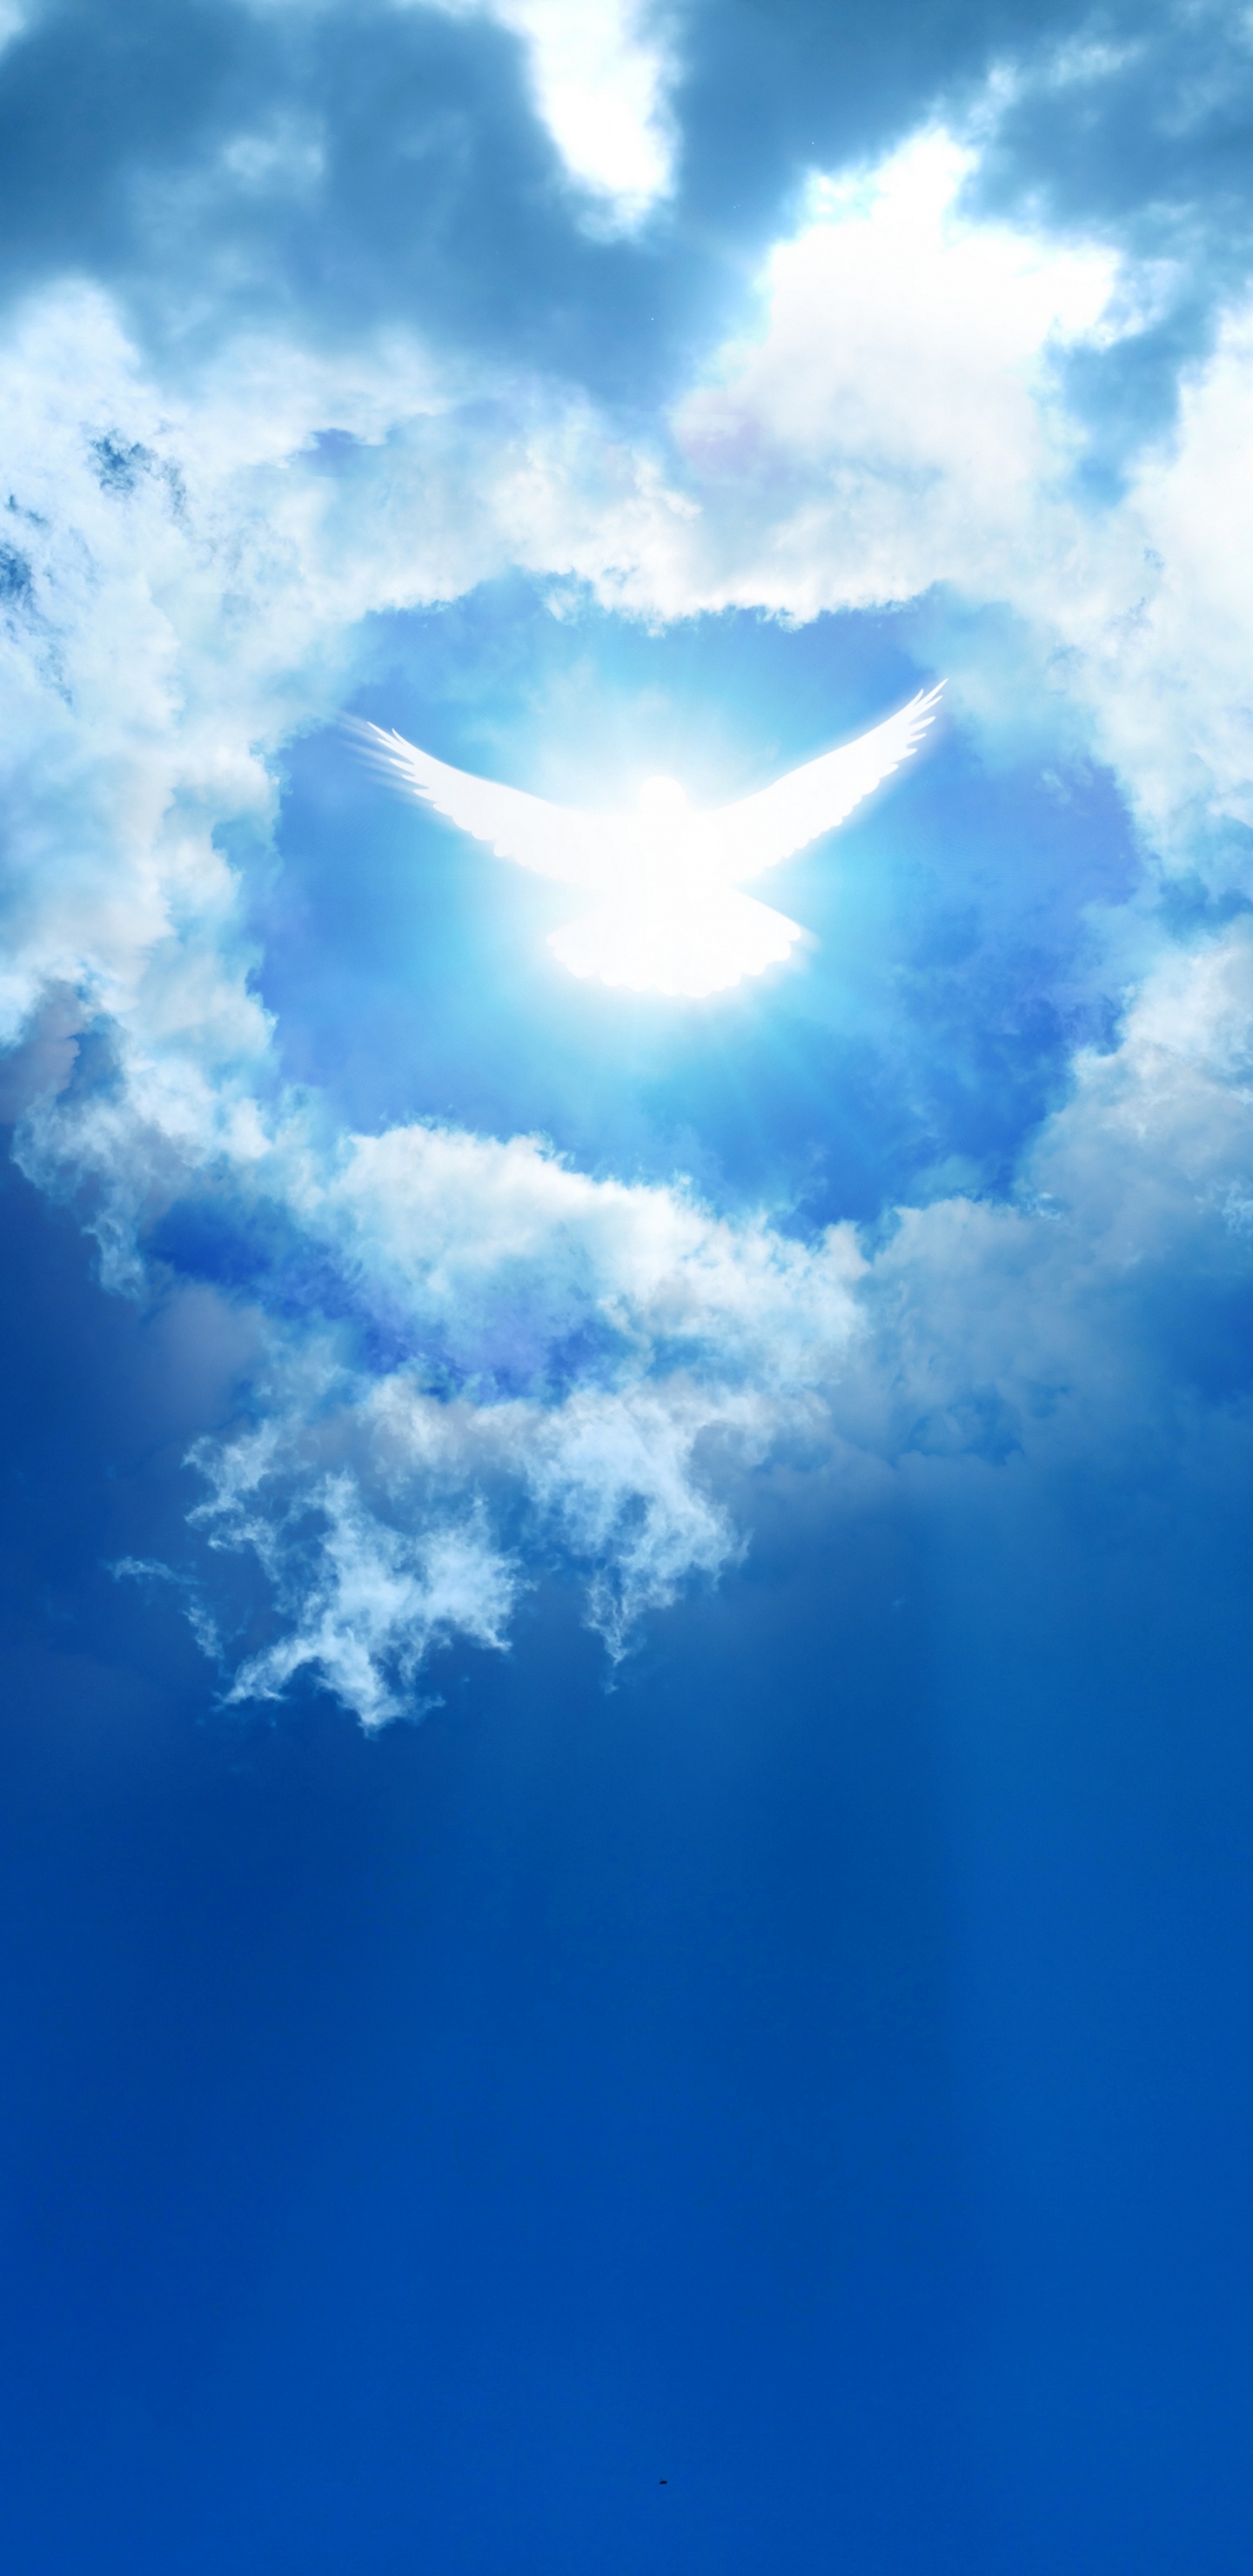 White Clouds and Blue Sky. Wallpaper in 1440x2960 Resolution